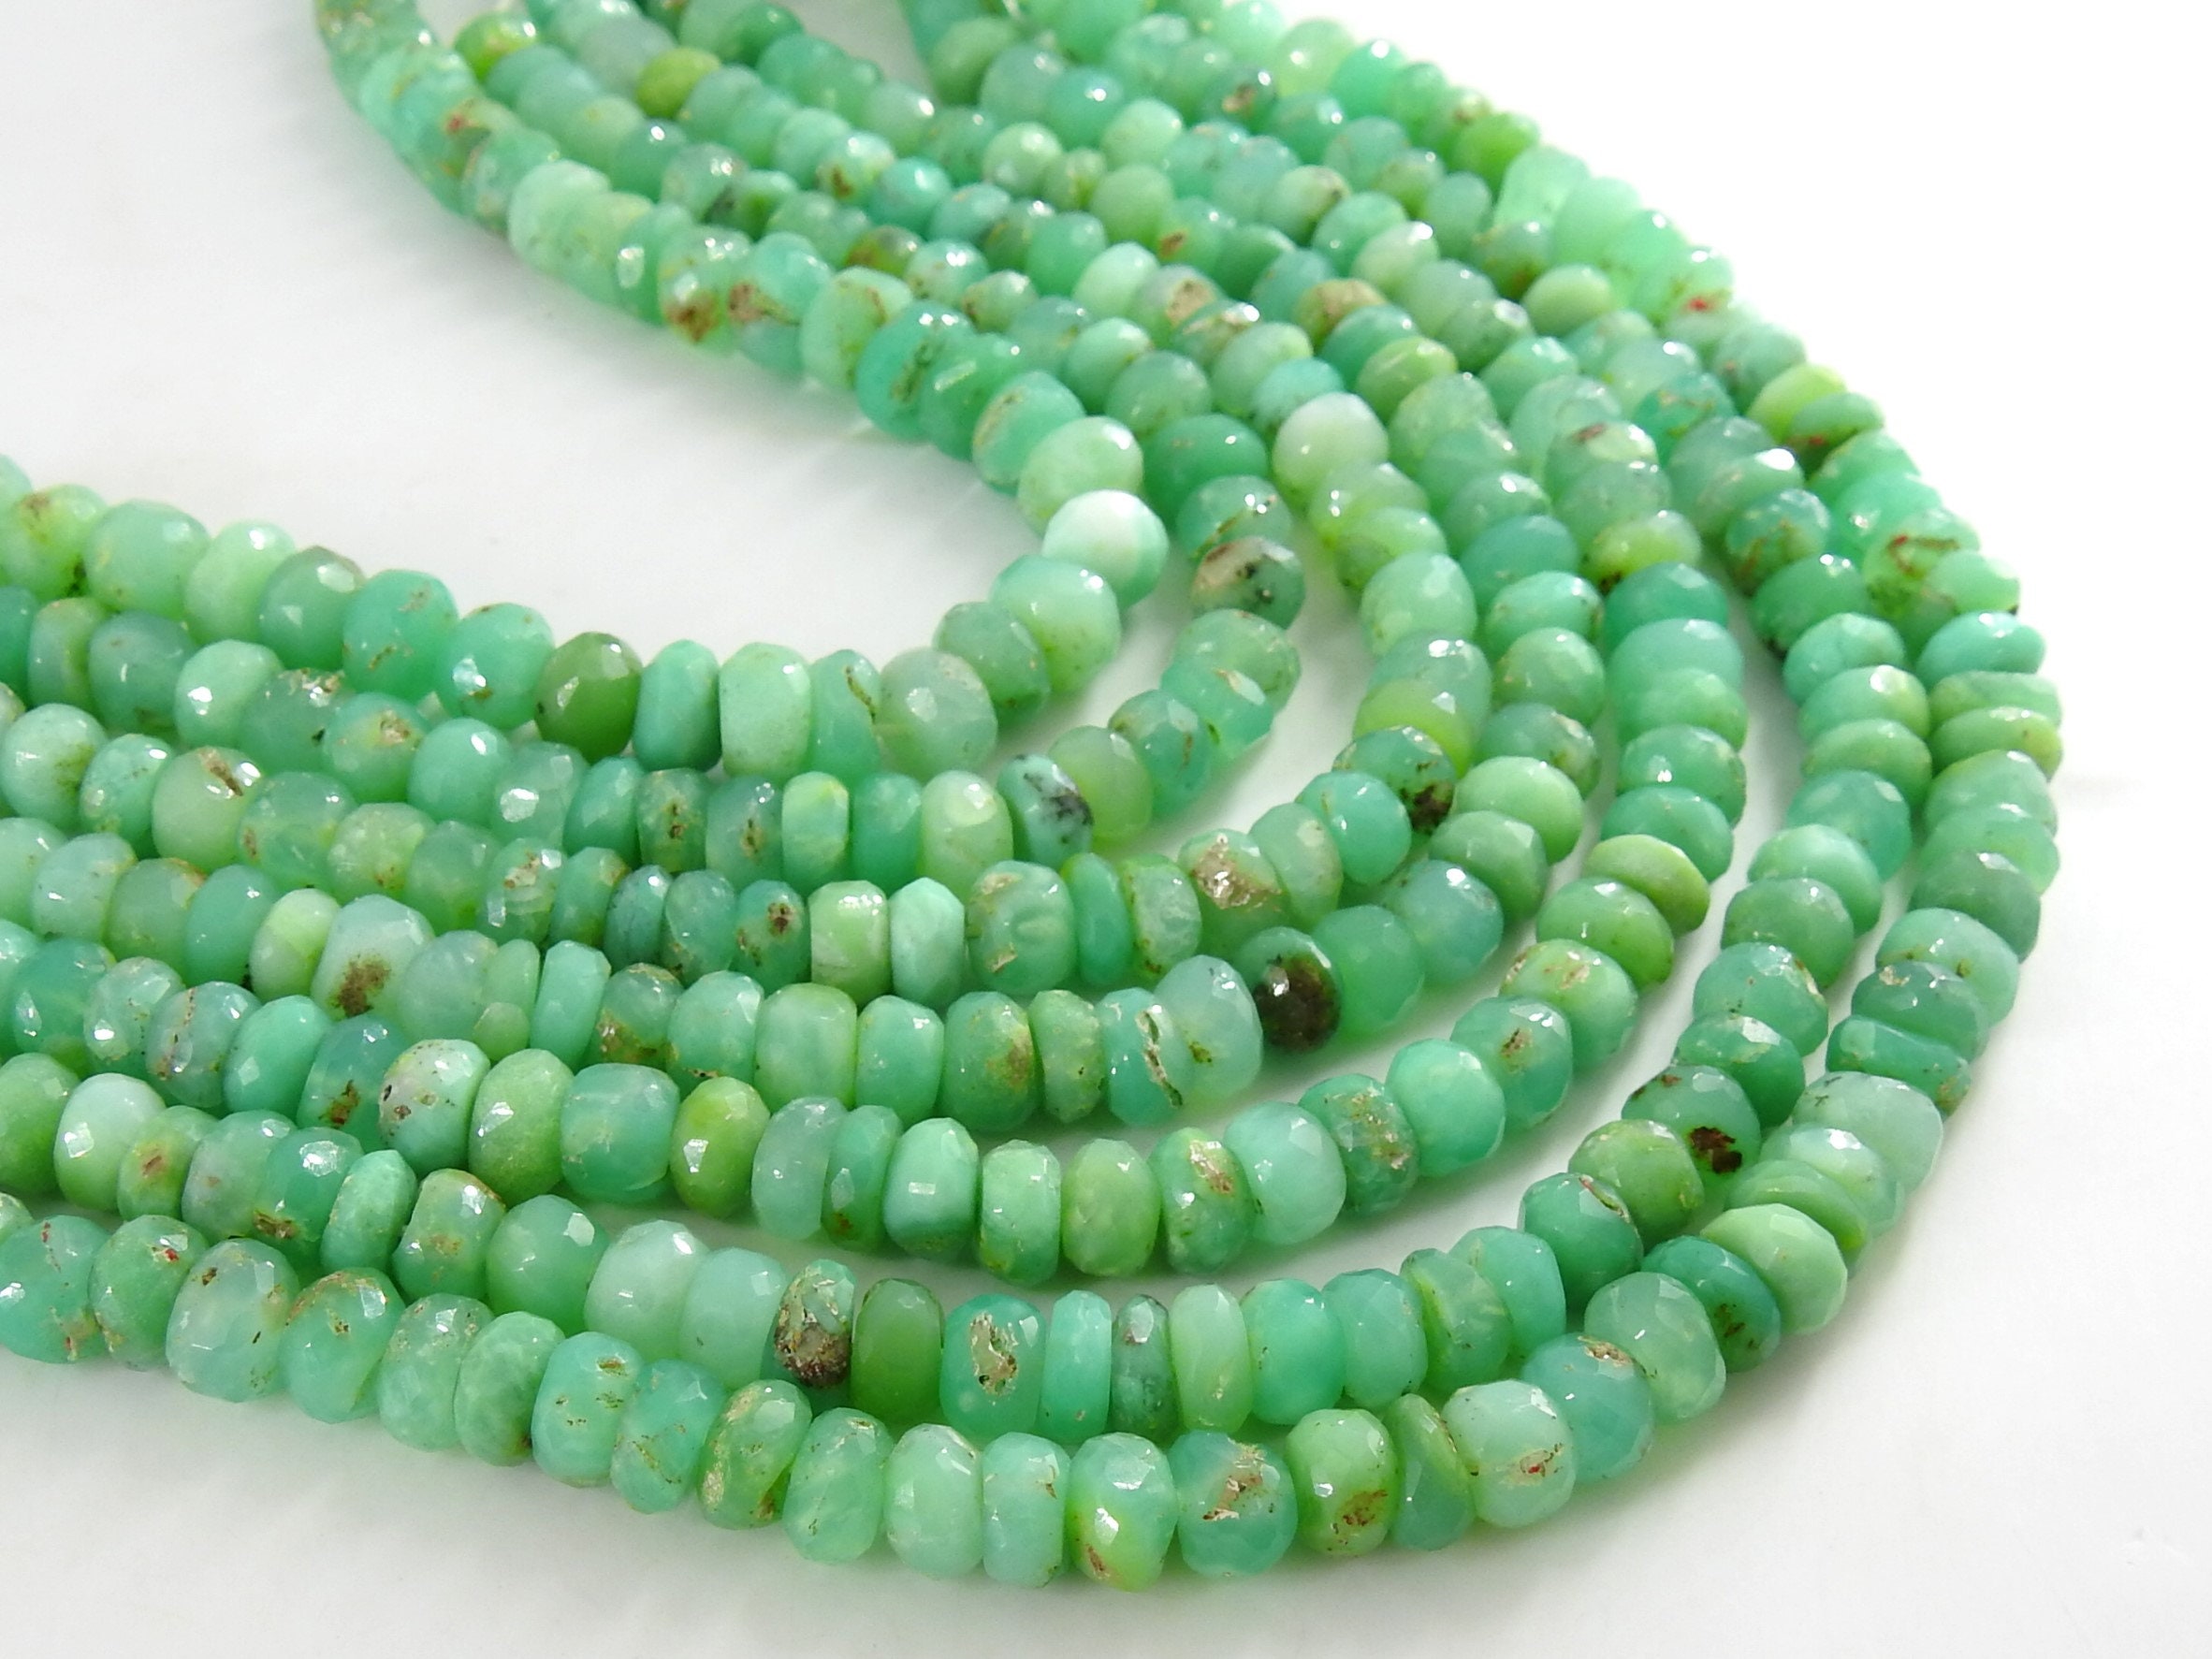 Chrysoprase Faceted Roundel Beads,Handmade,Loose Stone,For Making Jewelry,Necklace,Wholesaler,Supplies,13Inch 7X8MM,100%Natural PME-B4 | Save 33% - Rajasthan Living 13